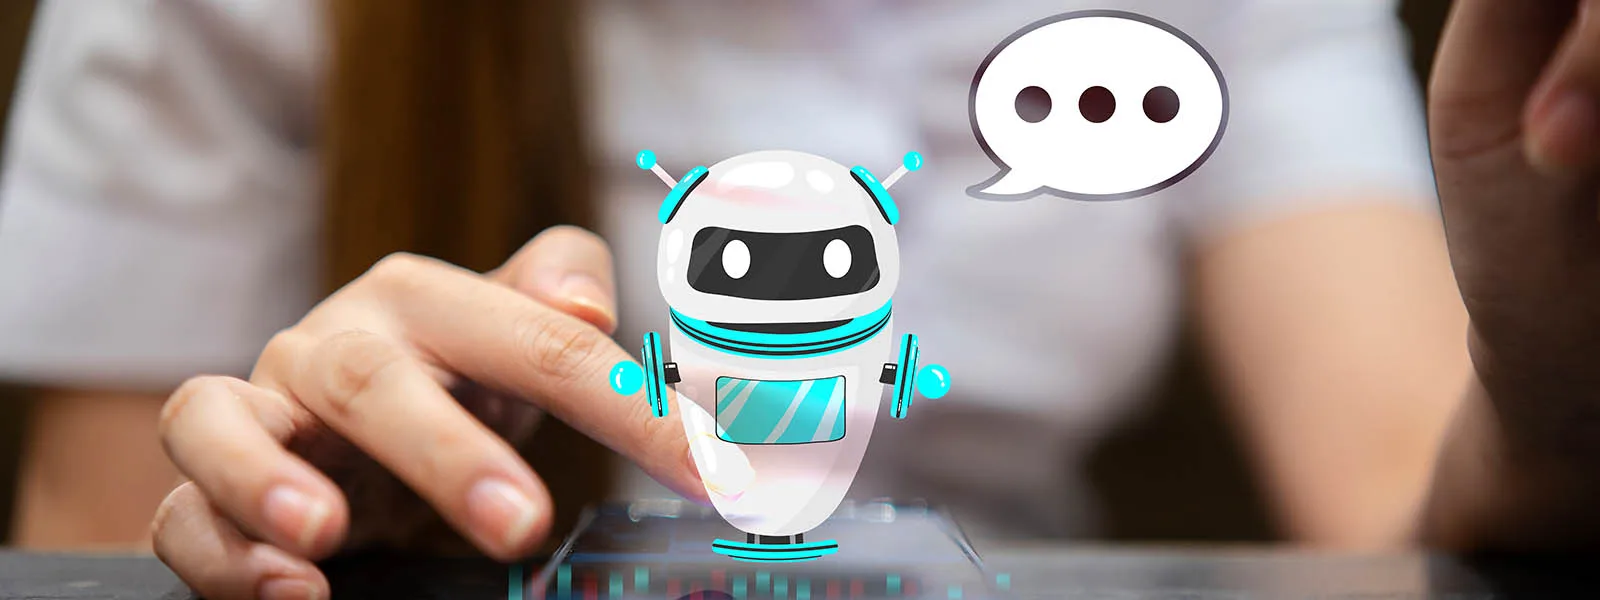 chatbot answering questions online, robot assistant help on webs